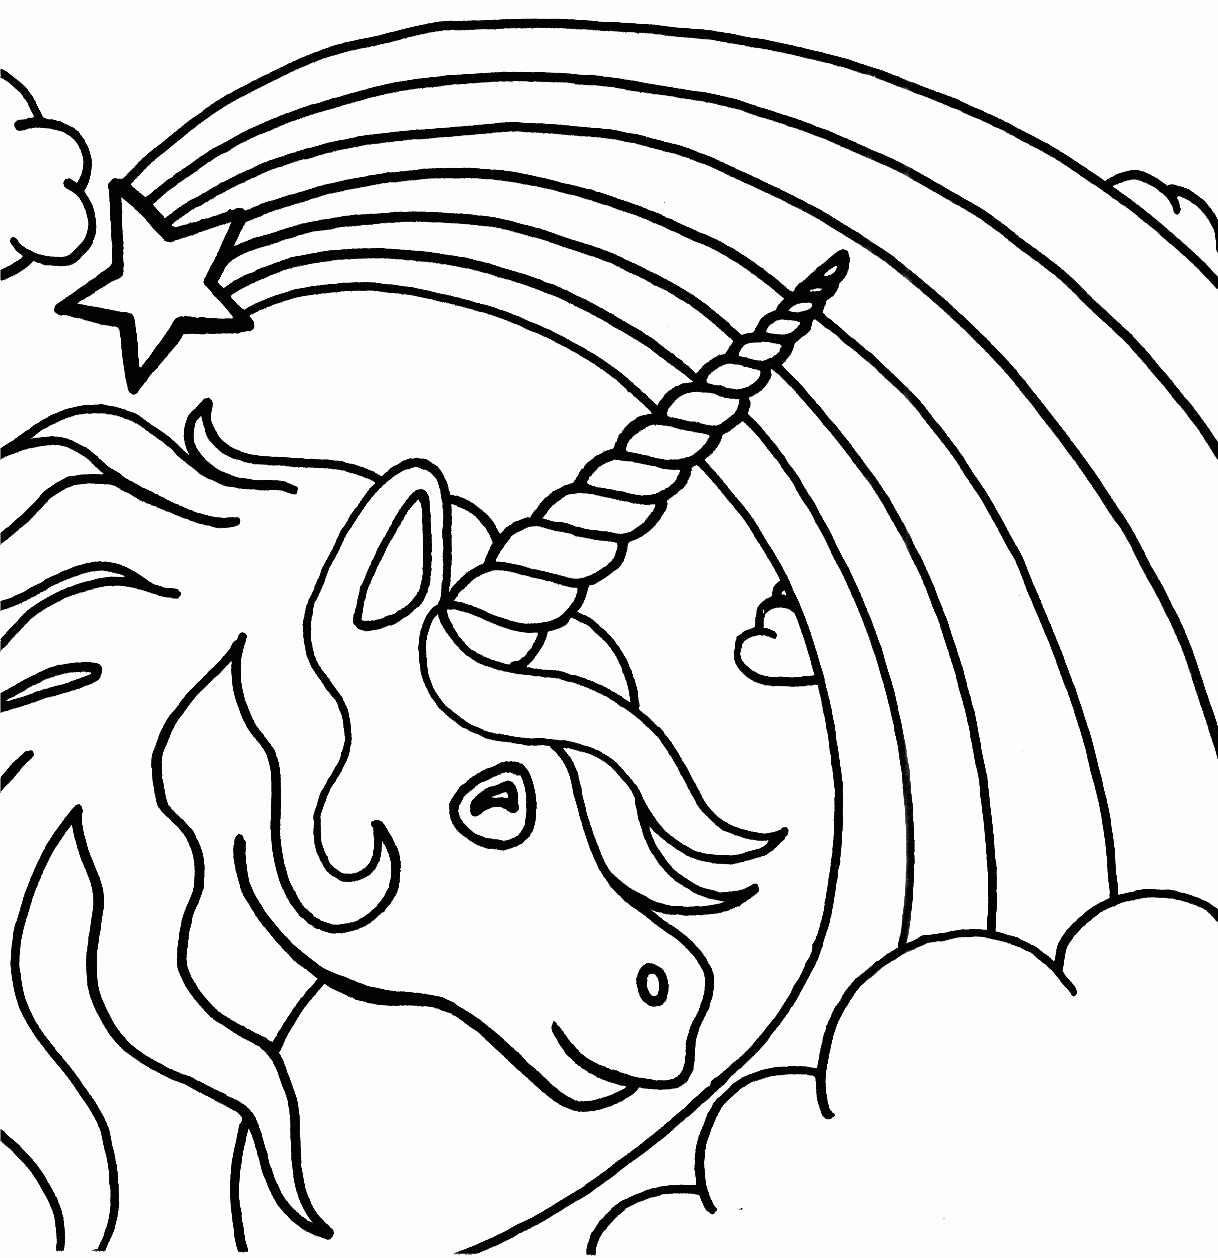 Unicorn Coloring Pages Online Unicorn Coloring Pages Online Coloring Home